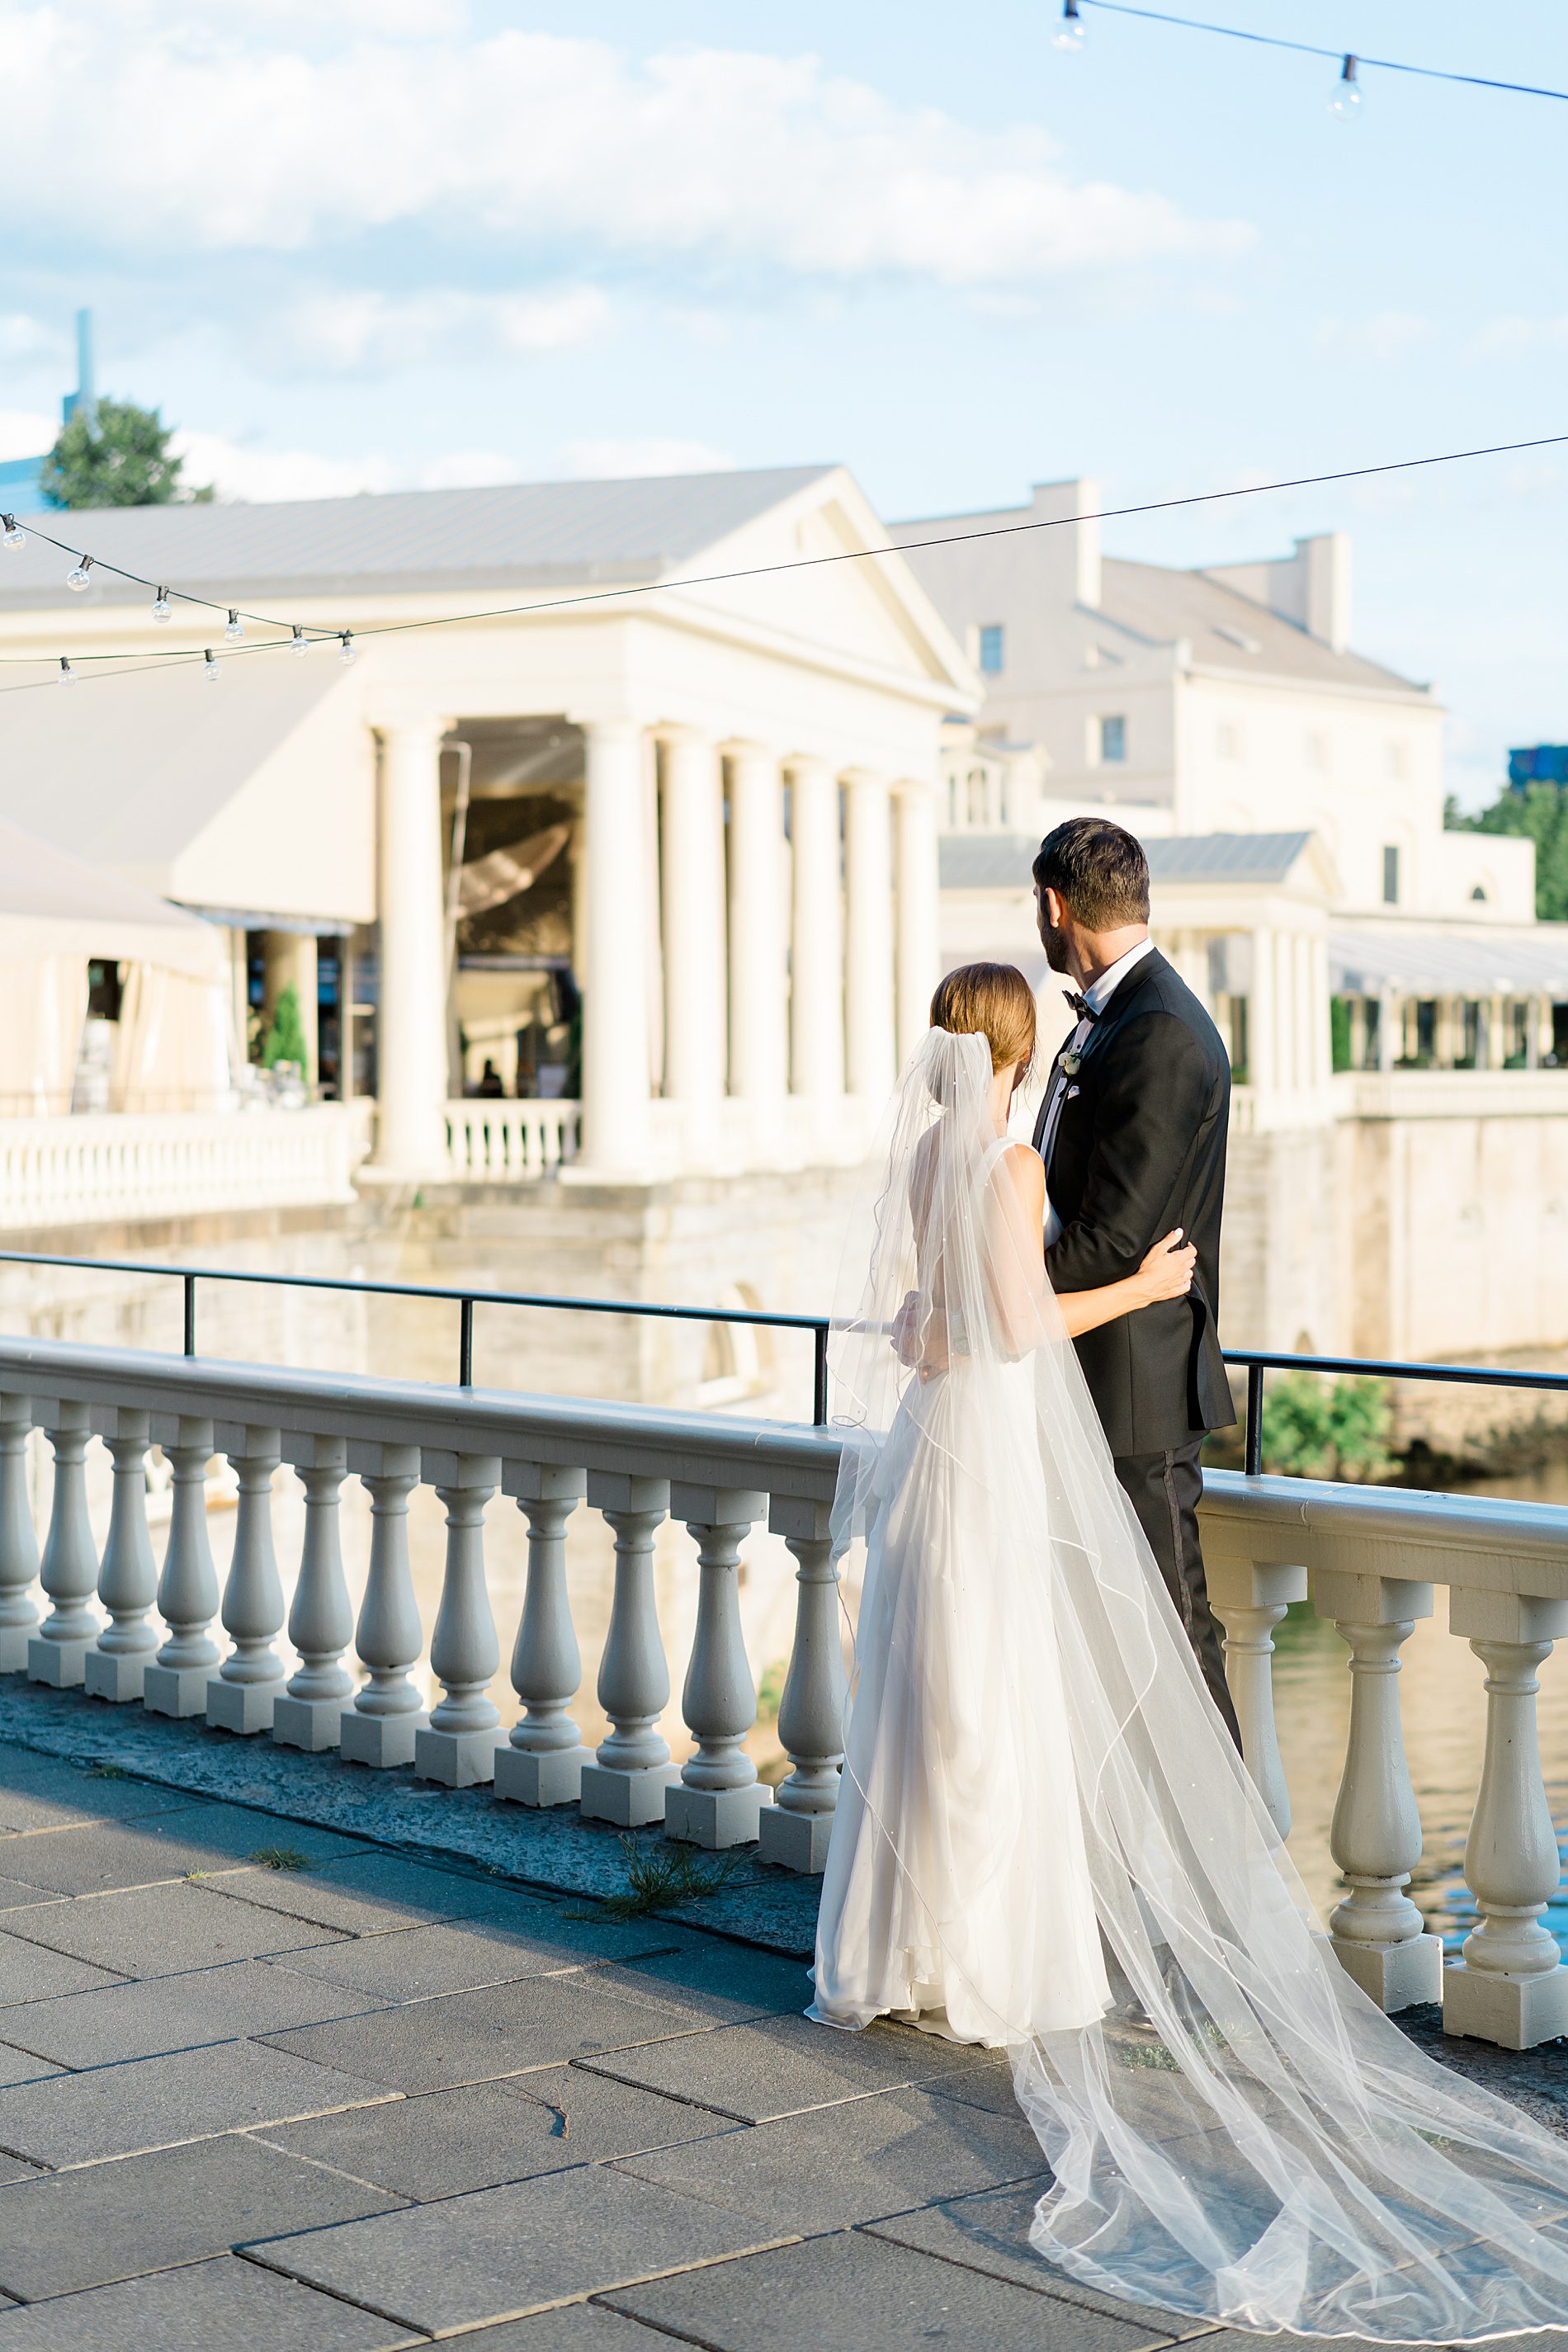 couple walking around the building at Water Works overlooking the water